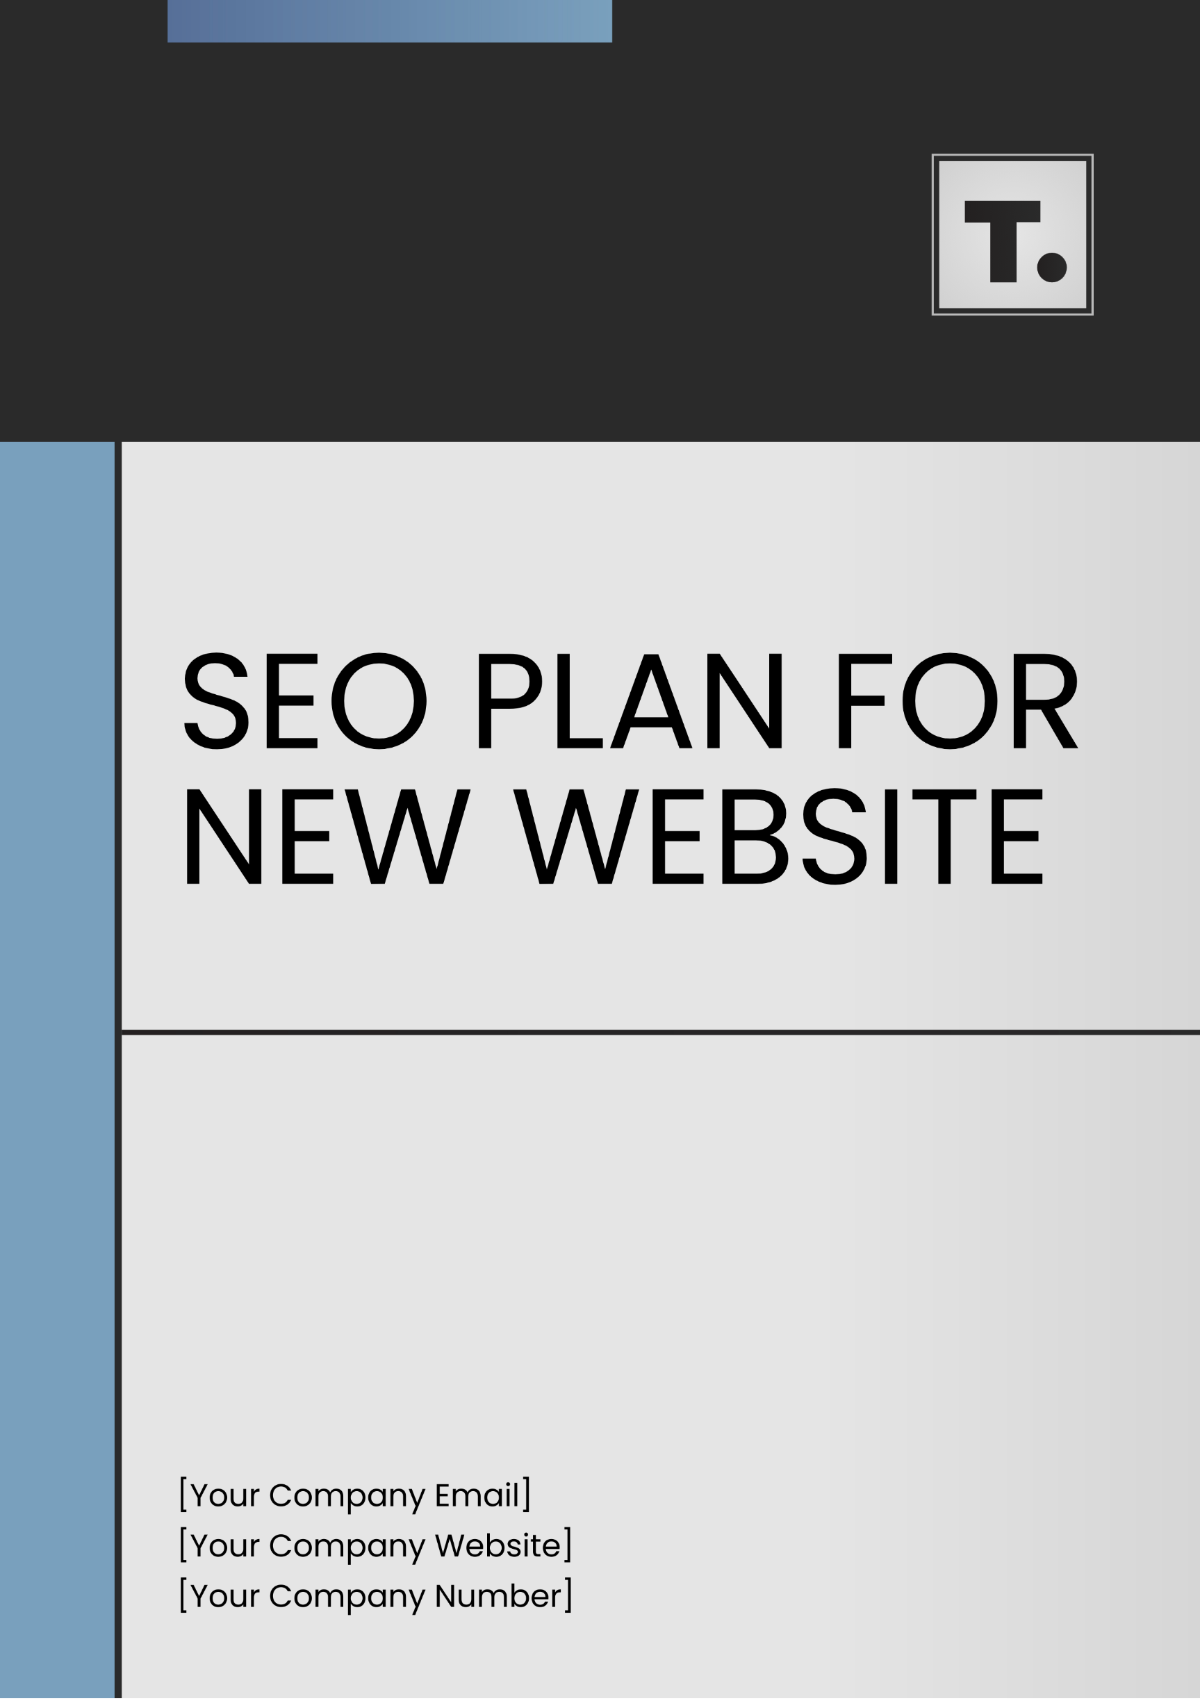 SEO Plan for New Website Template